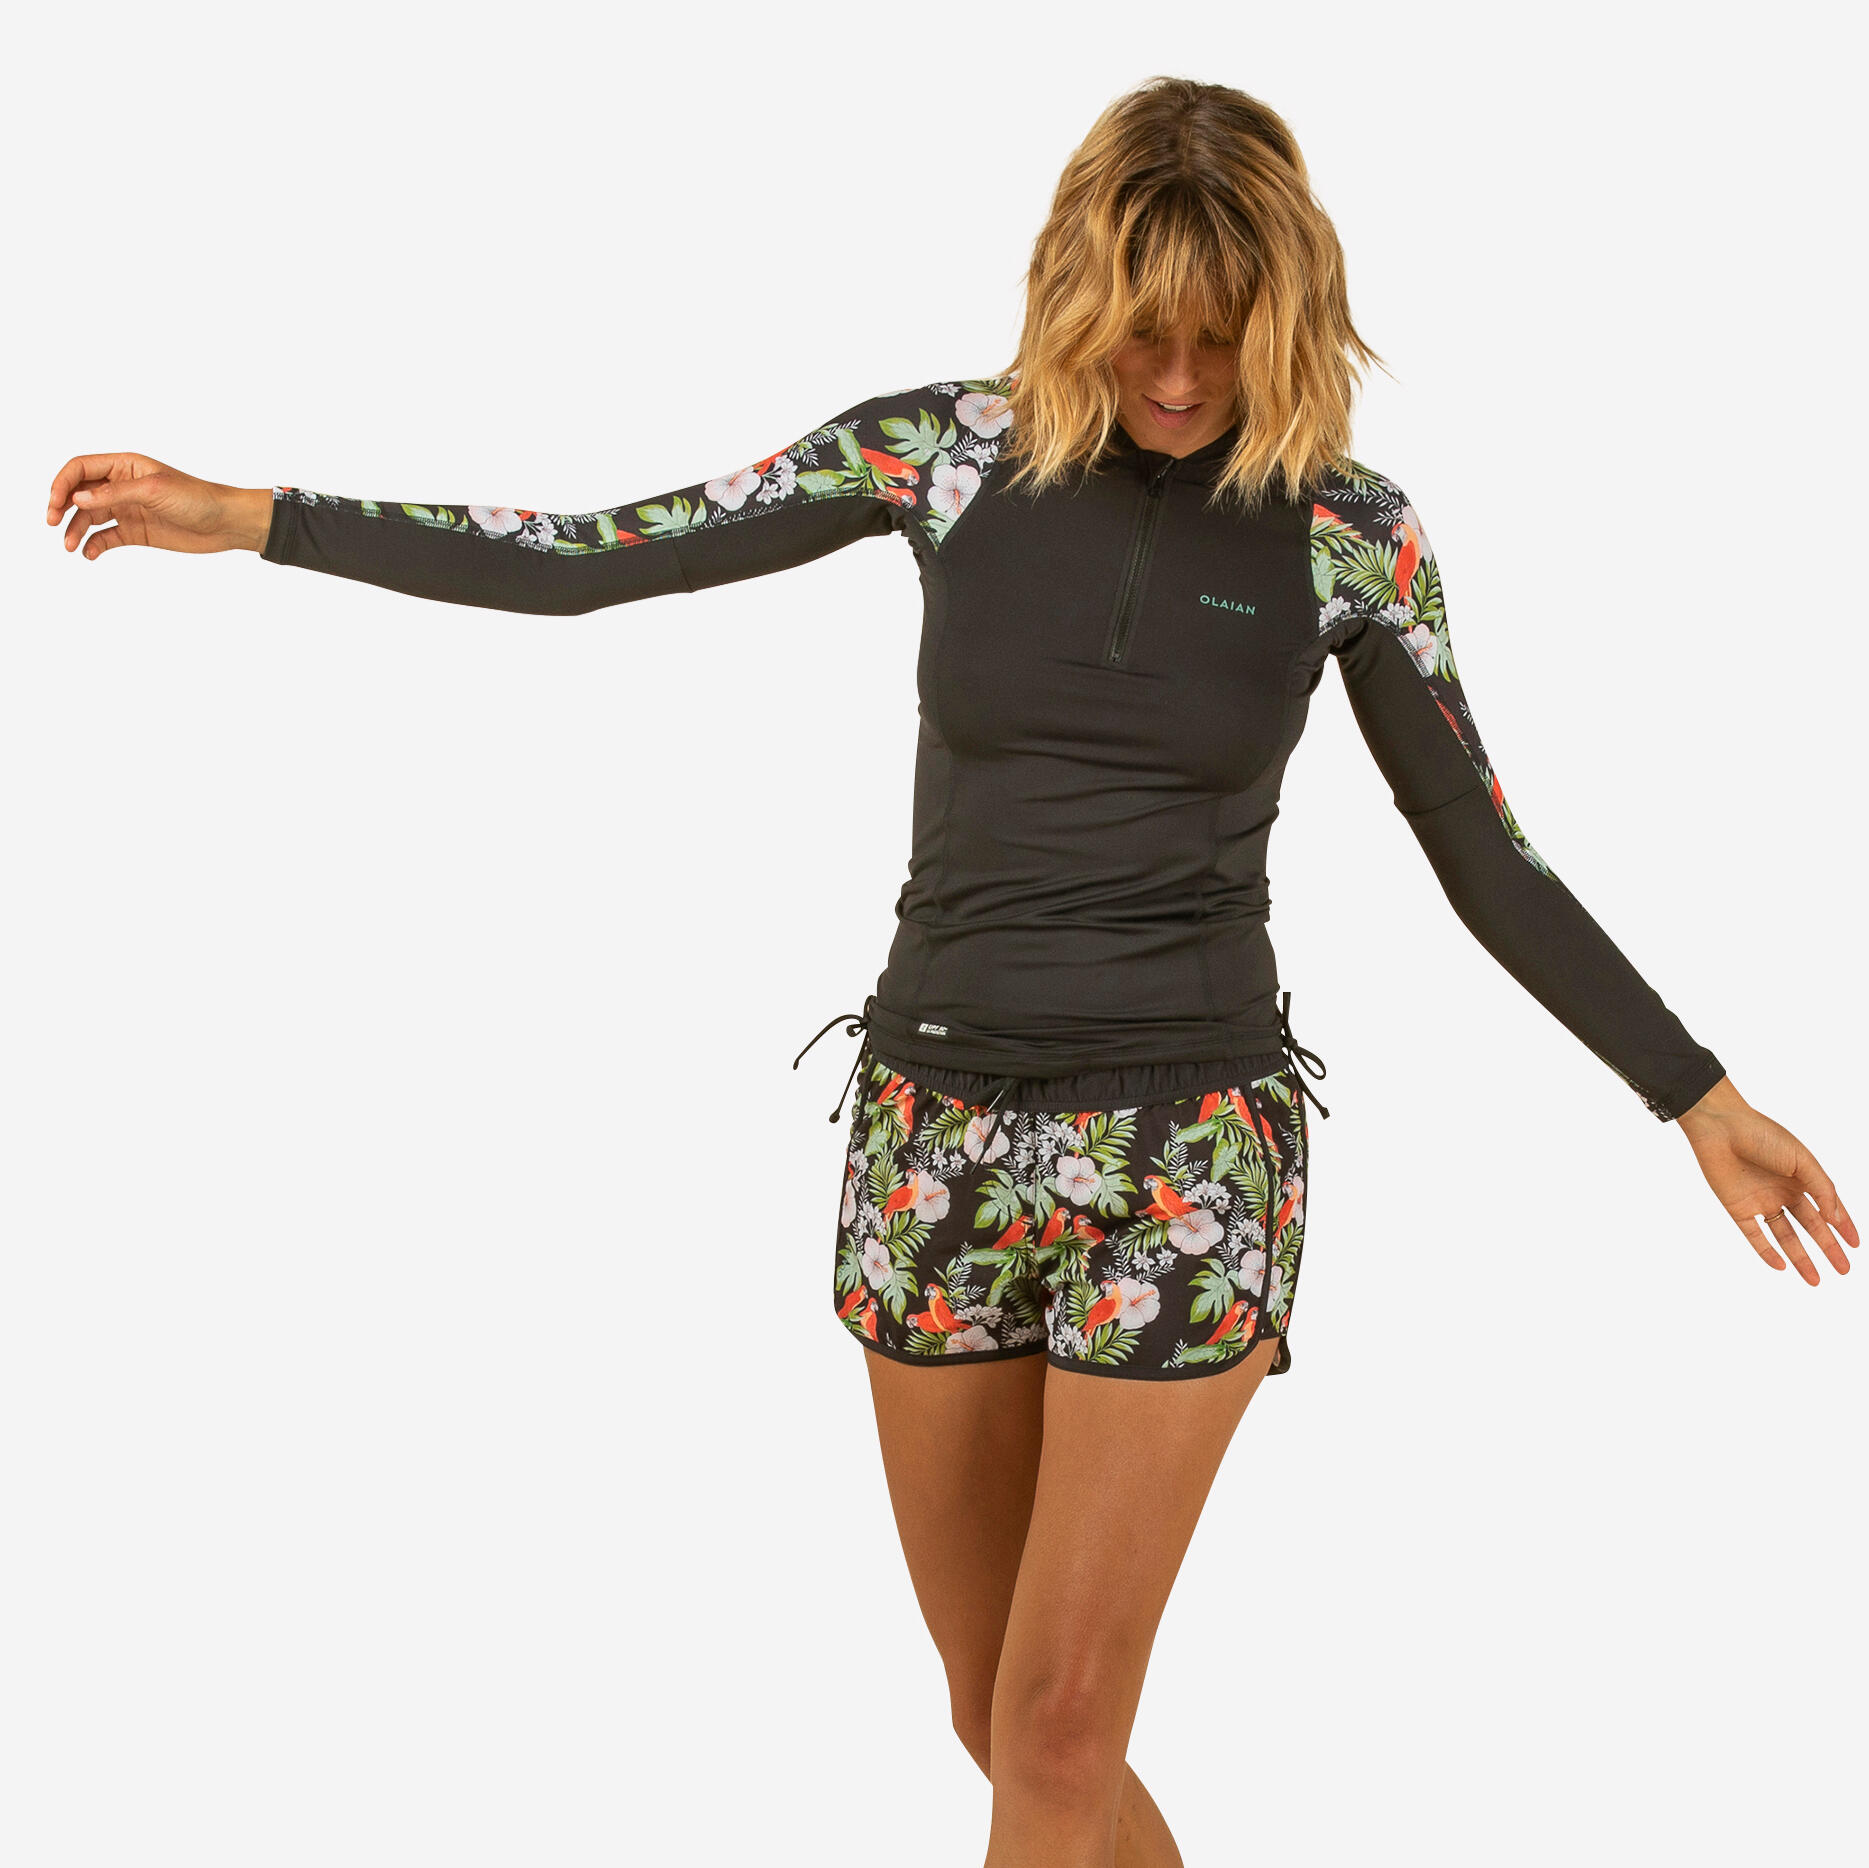 OLAIAN Women's Long Sleeve T-Shirt UV-Protection Surf Top 500 PARROT